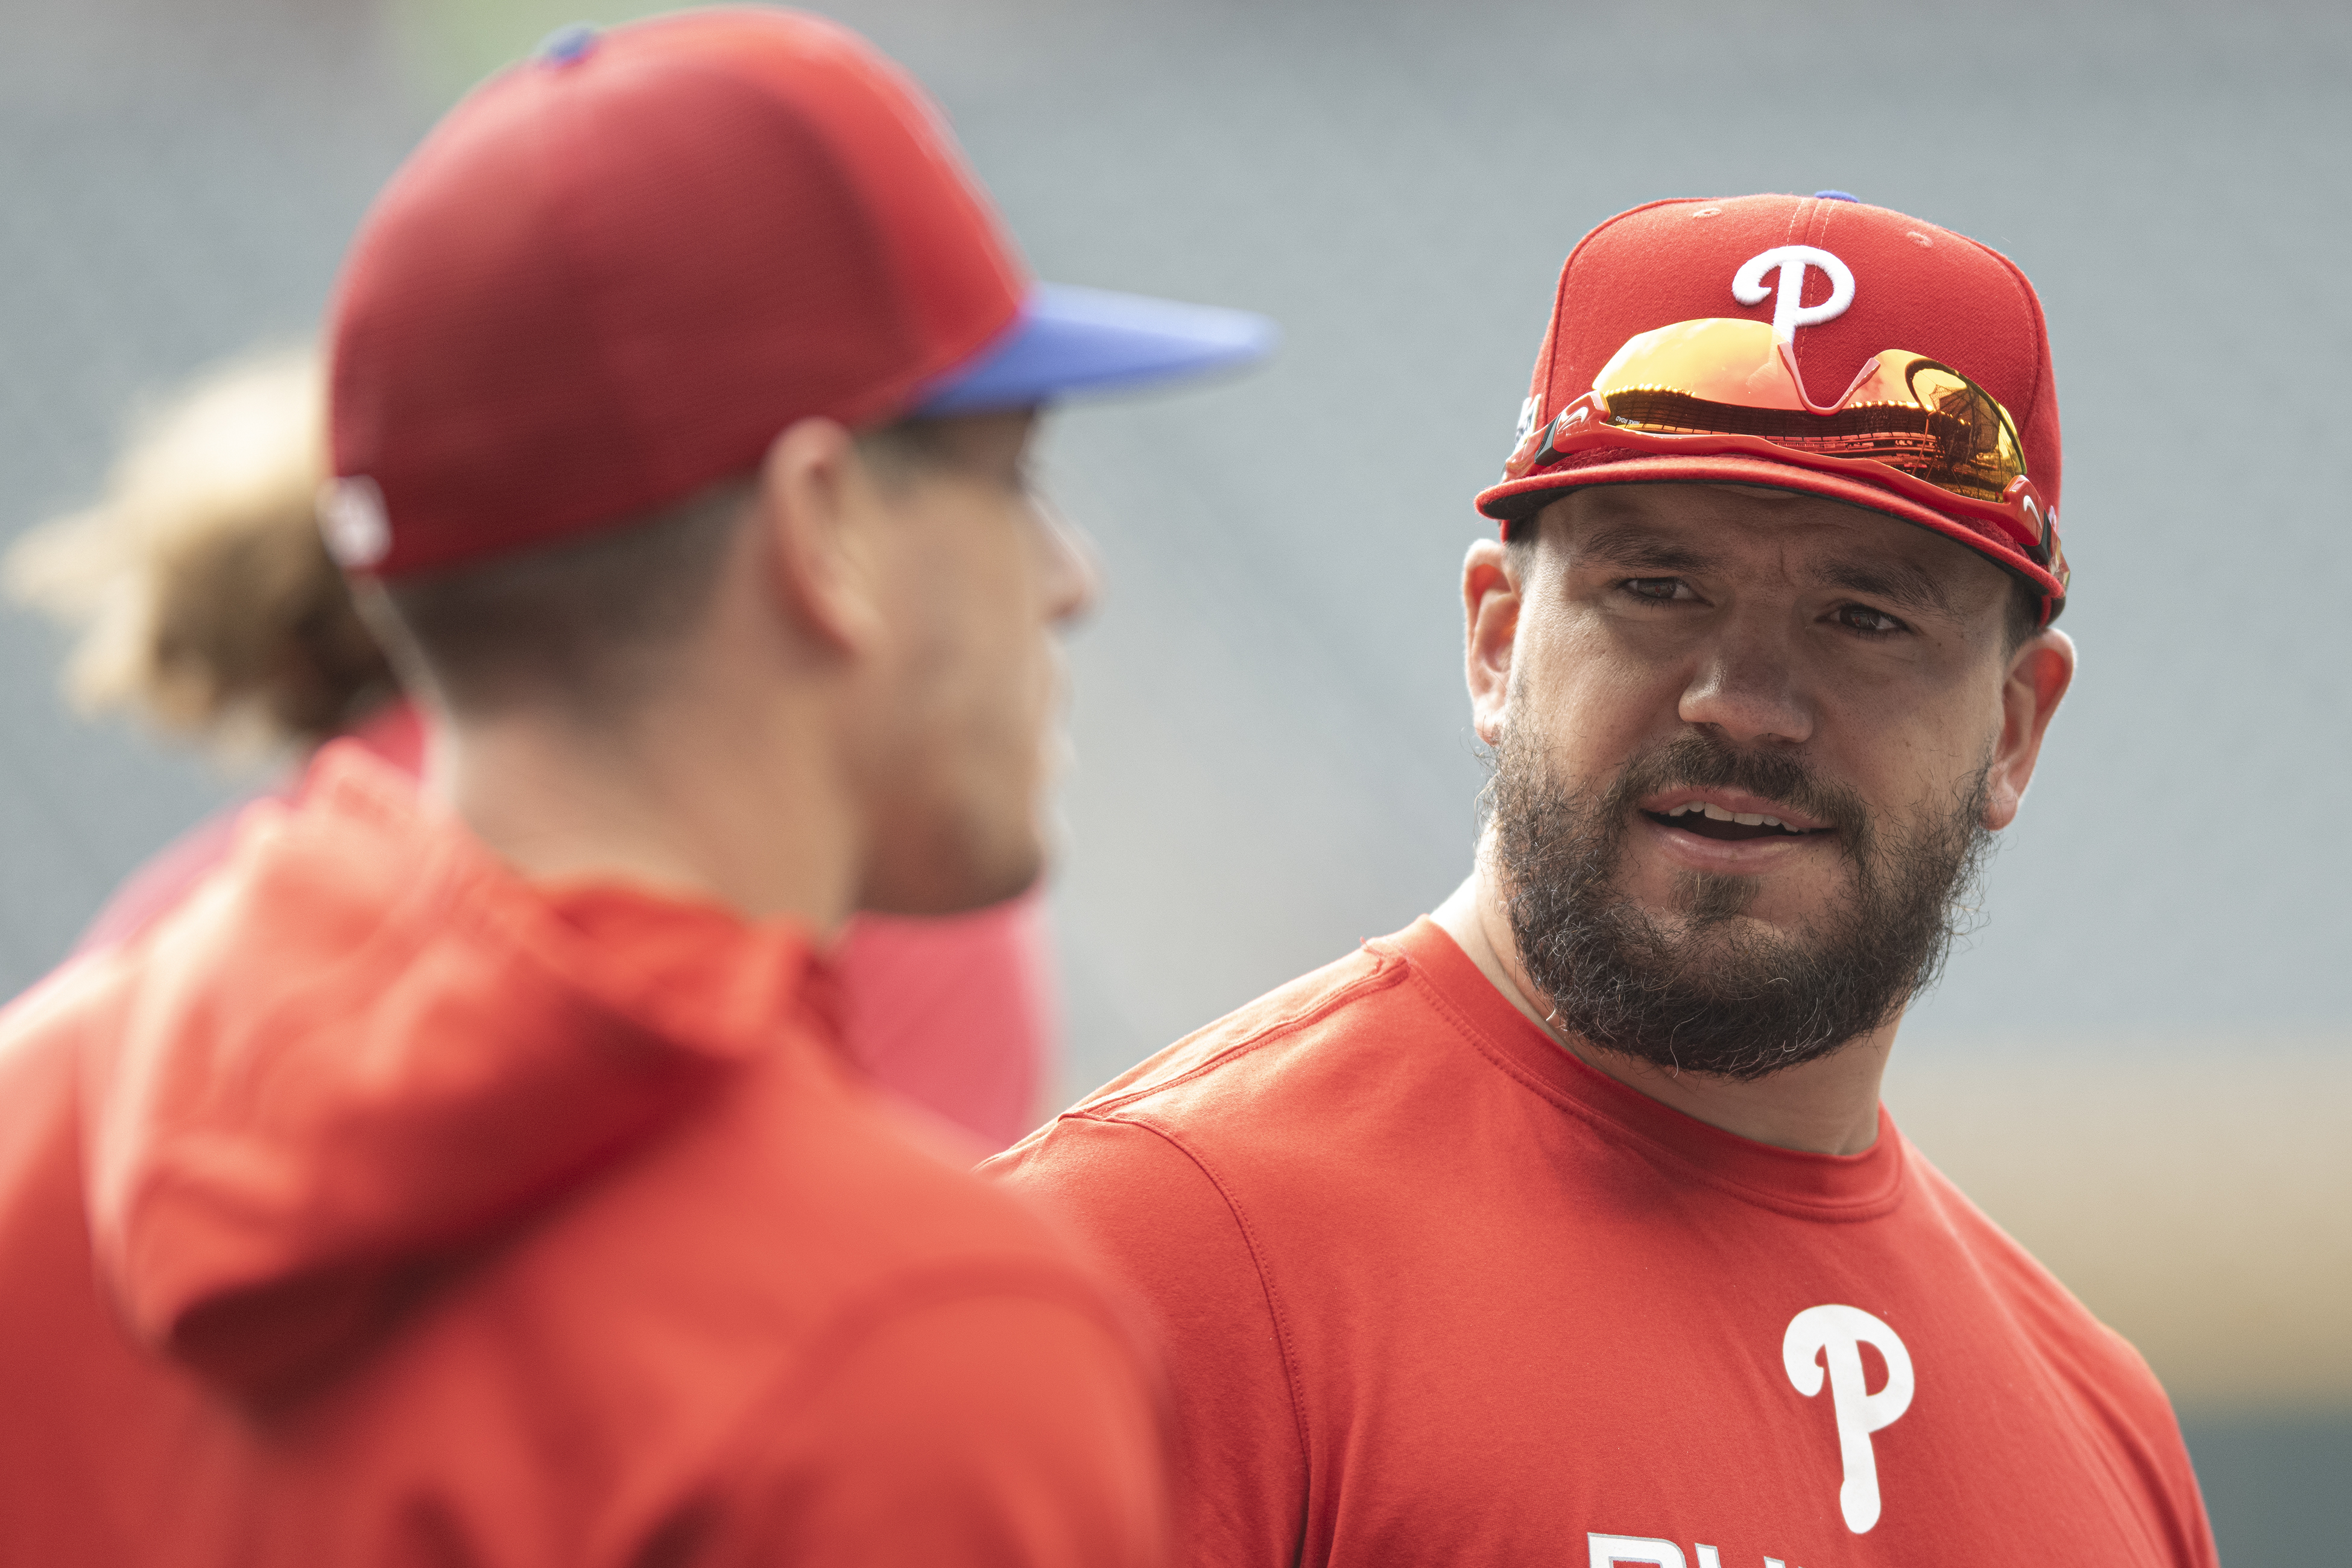 MLB playoffs: Kyle Schwarber is the leader of the Phillies. Just